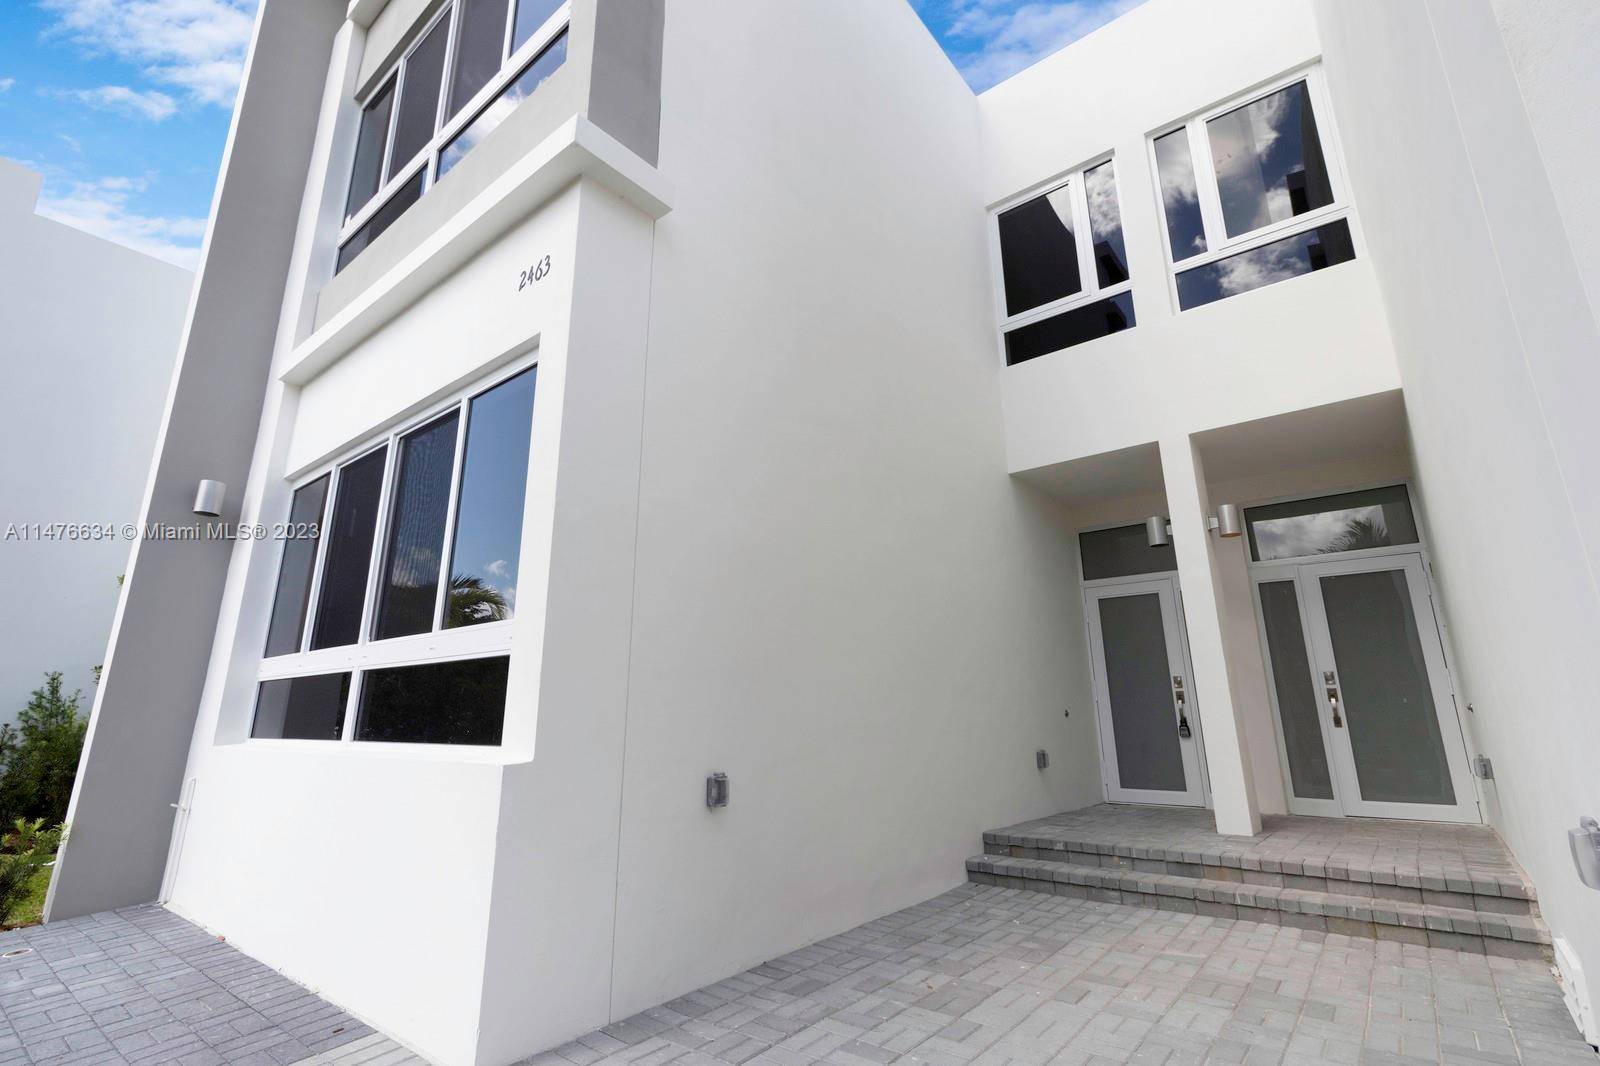 Highly desirable ParcView Villas Townhome available for rent.